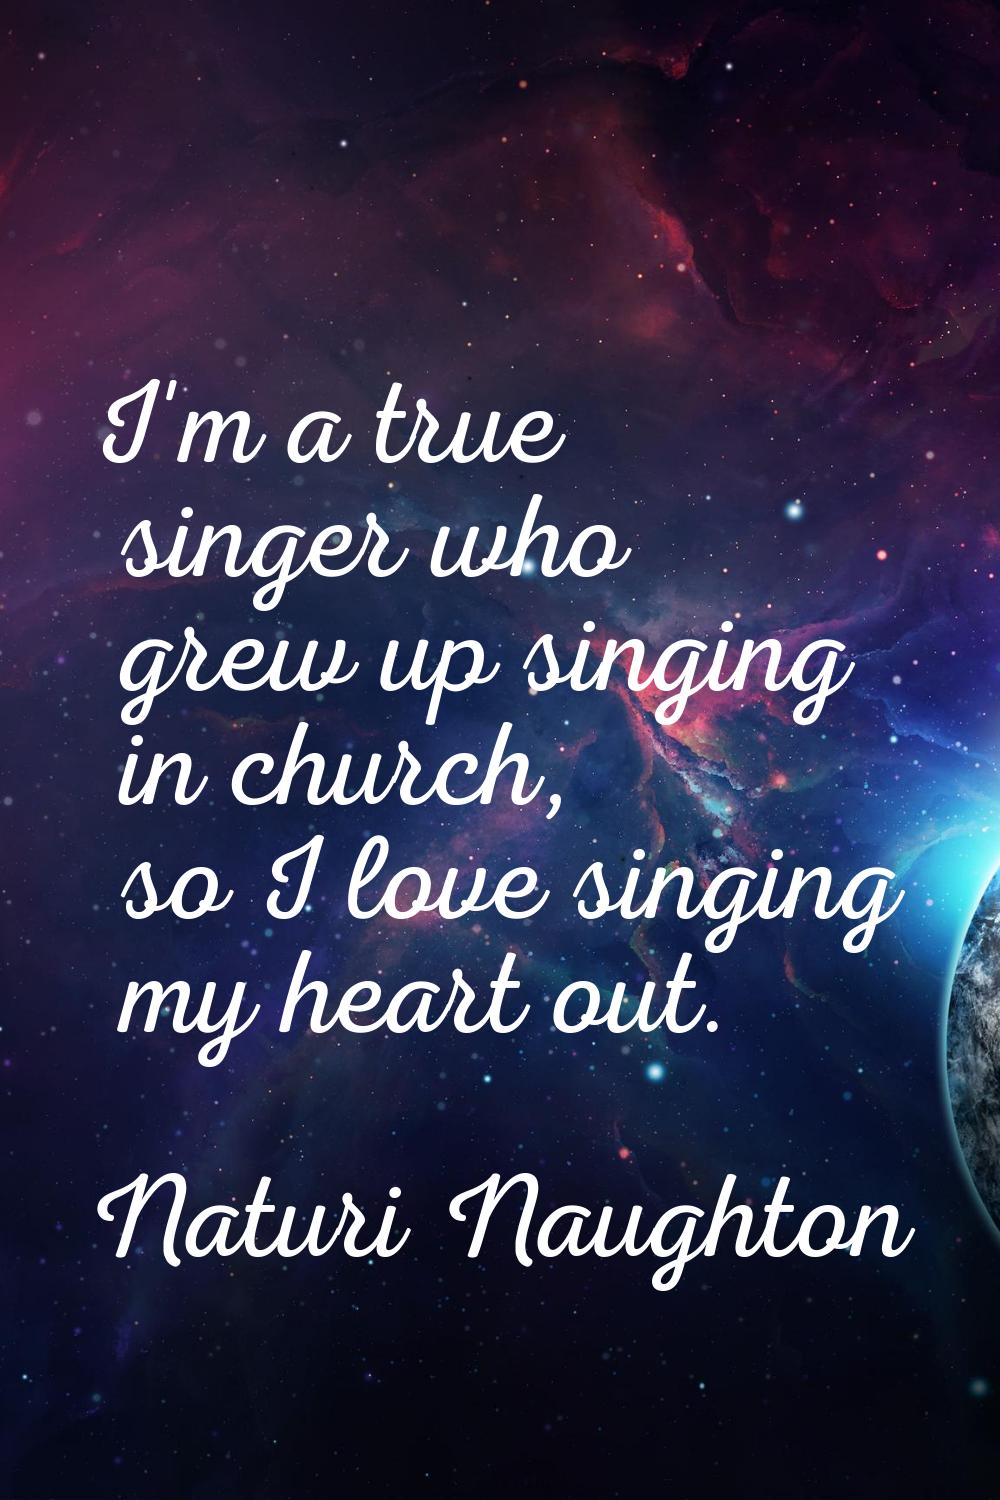 I'm a true singer who grew up singing in church, so I love singing my heart out.